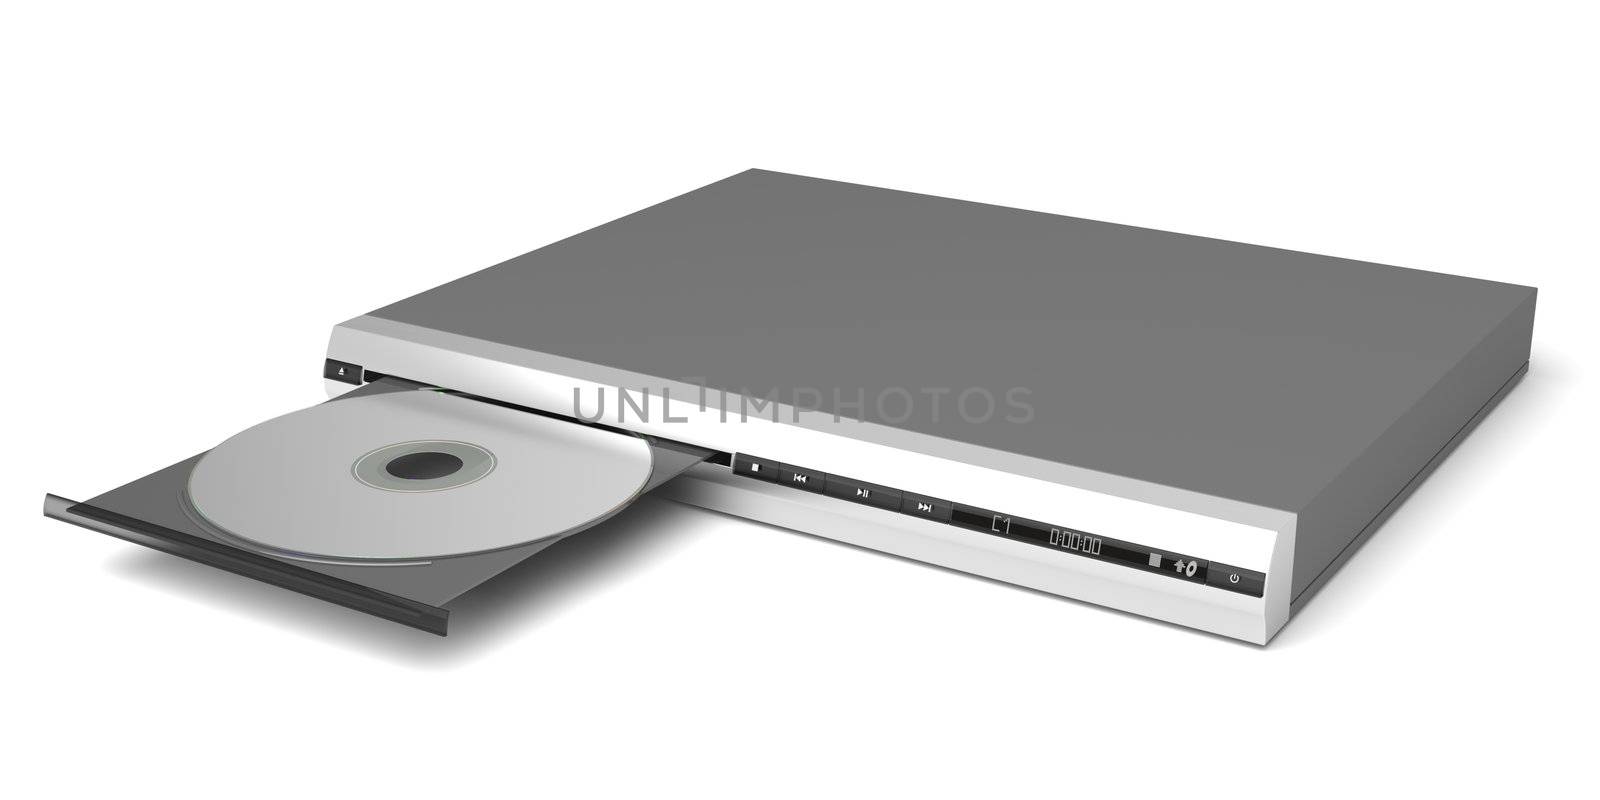 DVD player with open tray on white background